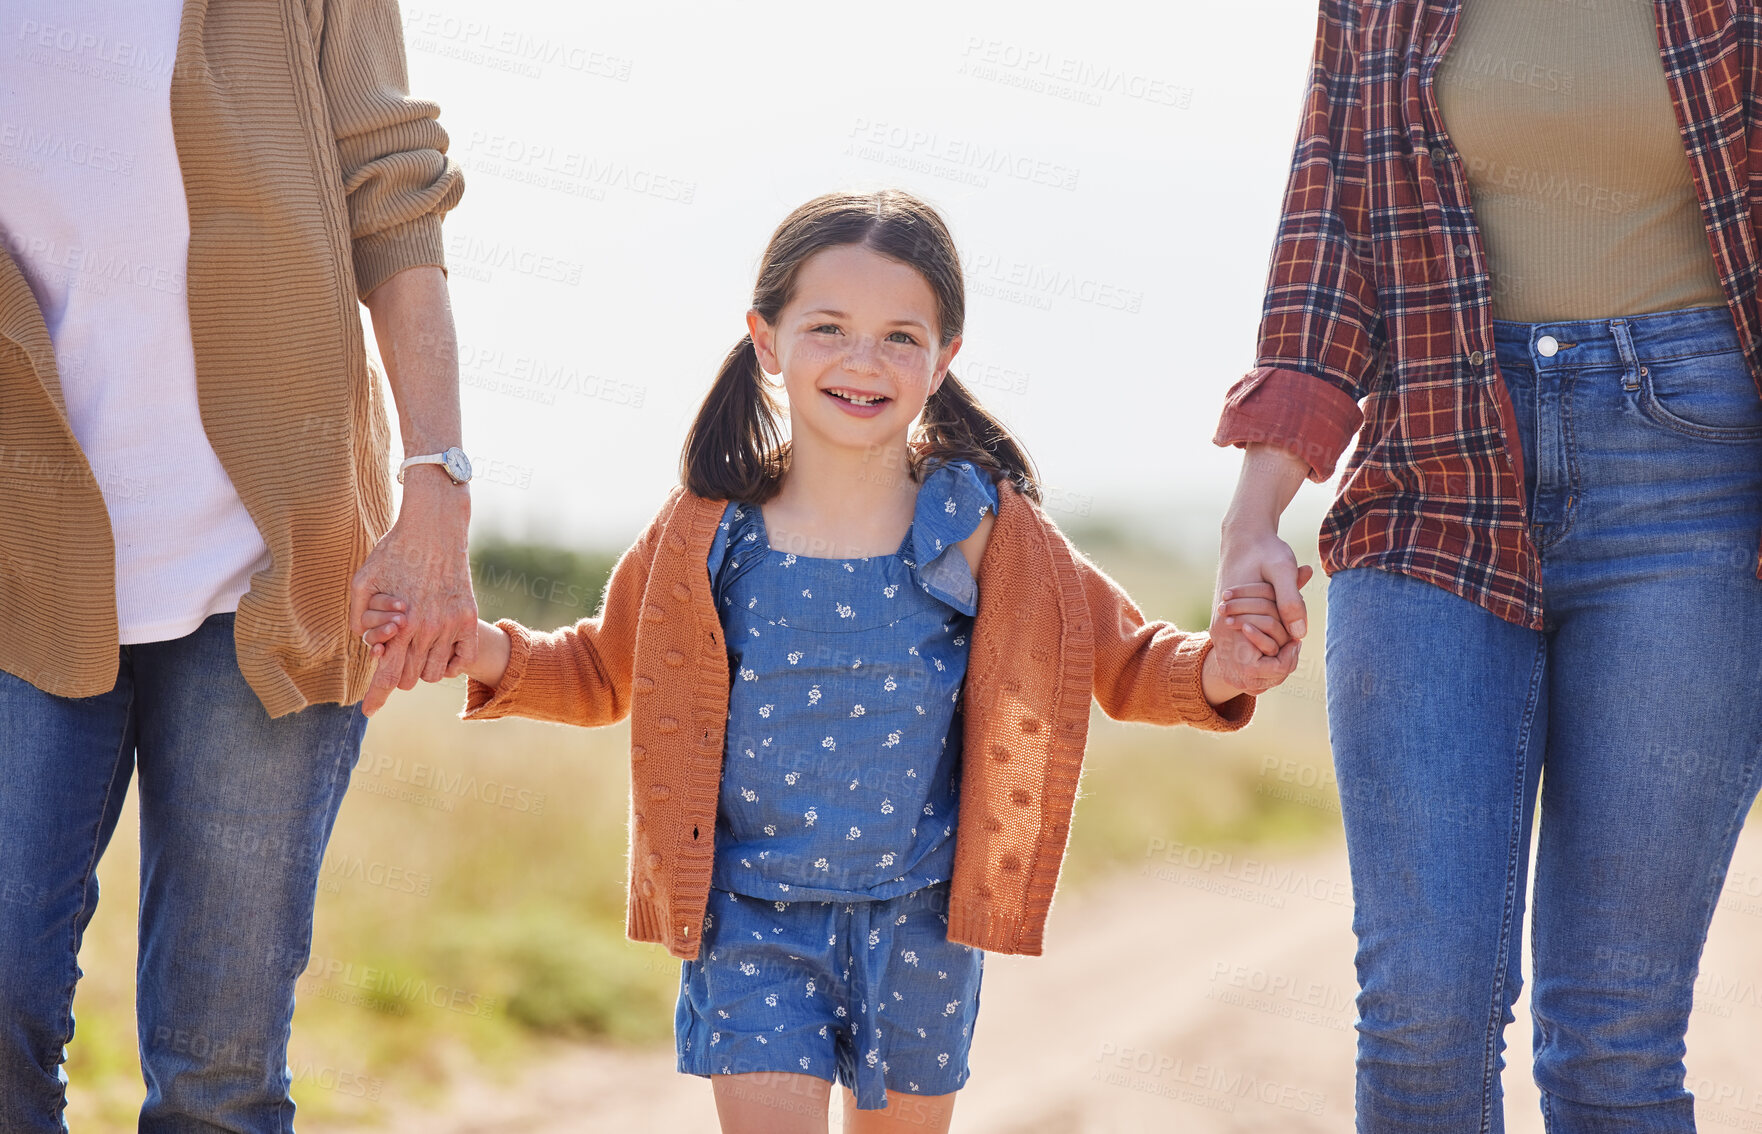 Buy stock photo Shot of a little girl walking on a farm with her family